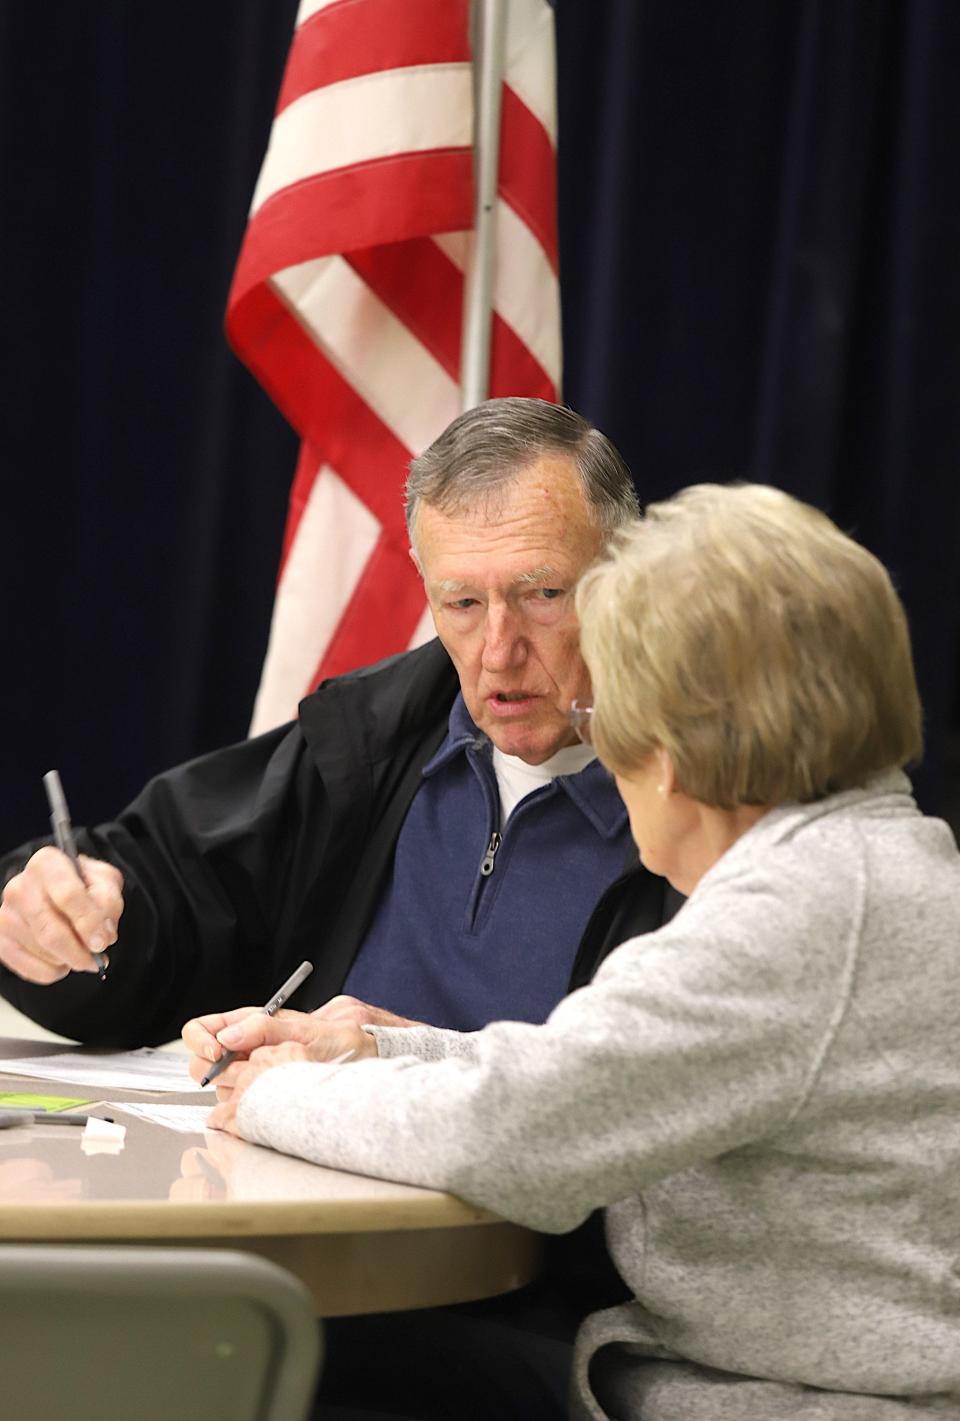 Tim and Barbara Farrell vote in the midterm elections Tuesday, Nov. 8, 2022, at Oak Street Baptist Church in Burlington.